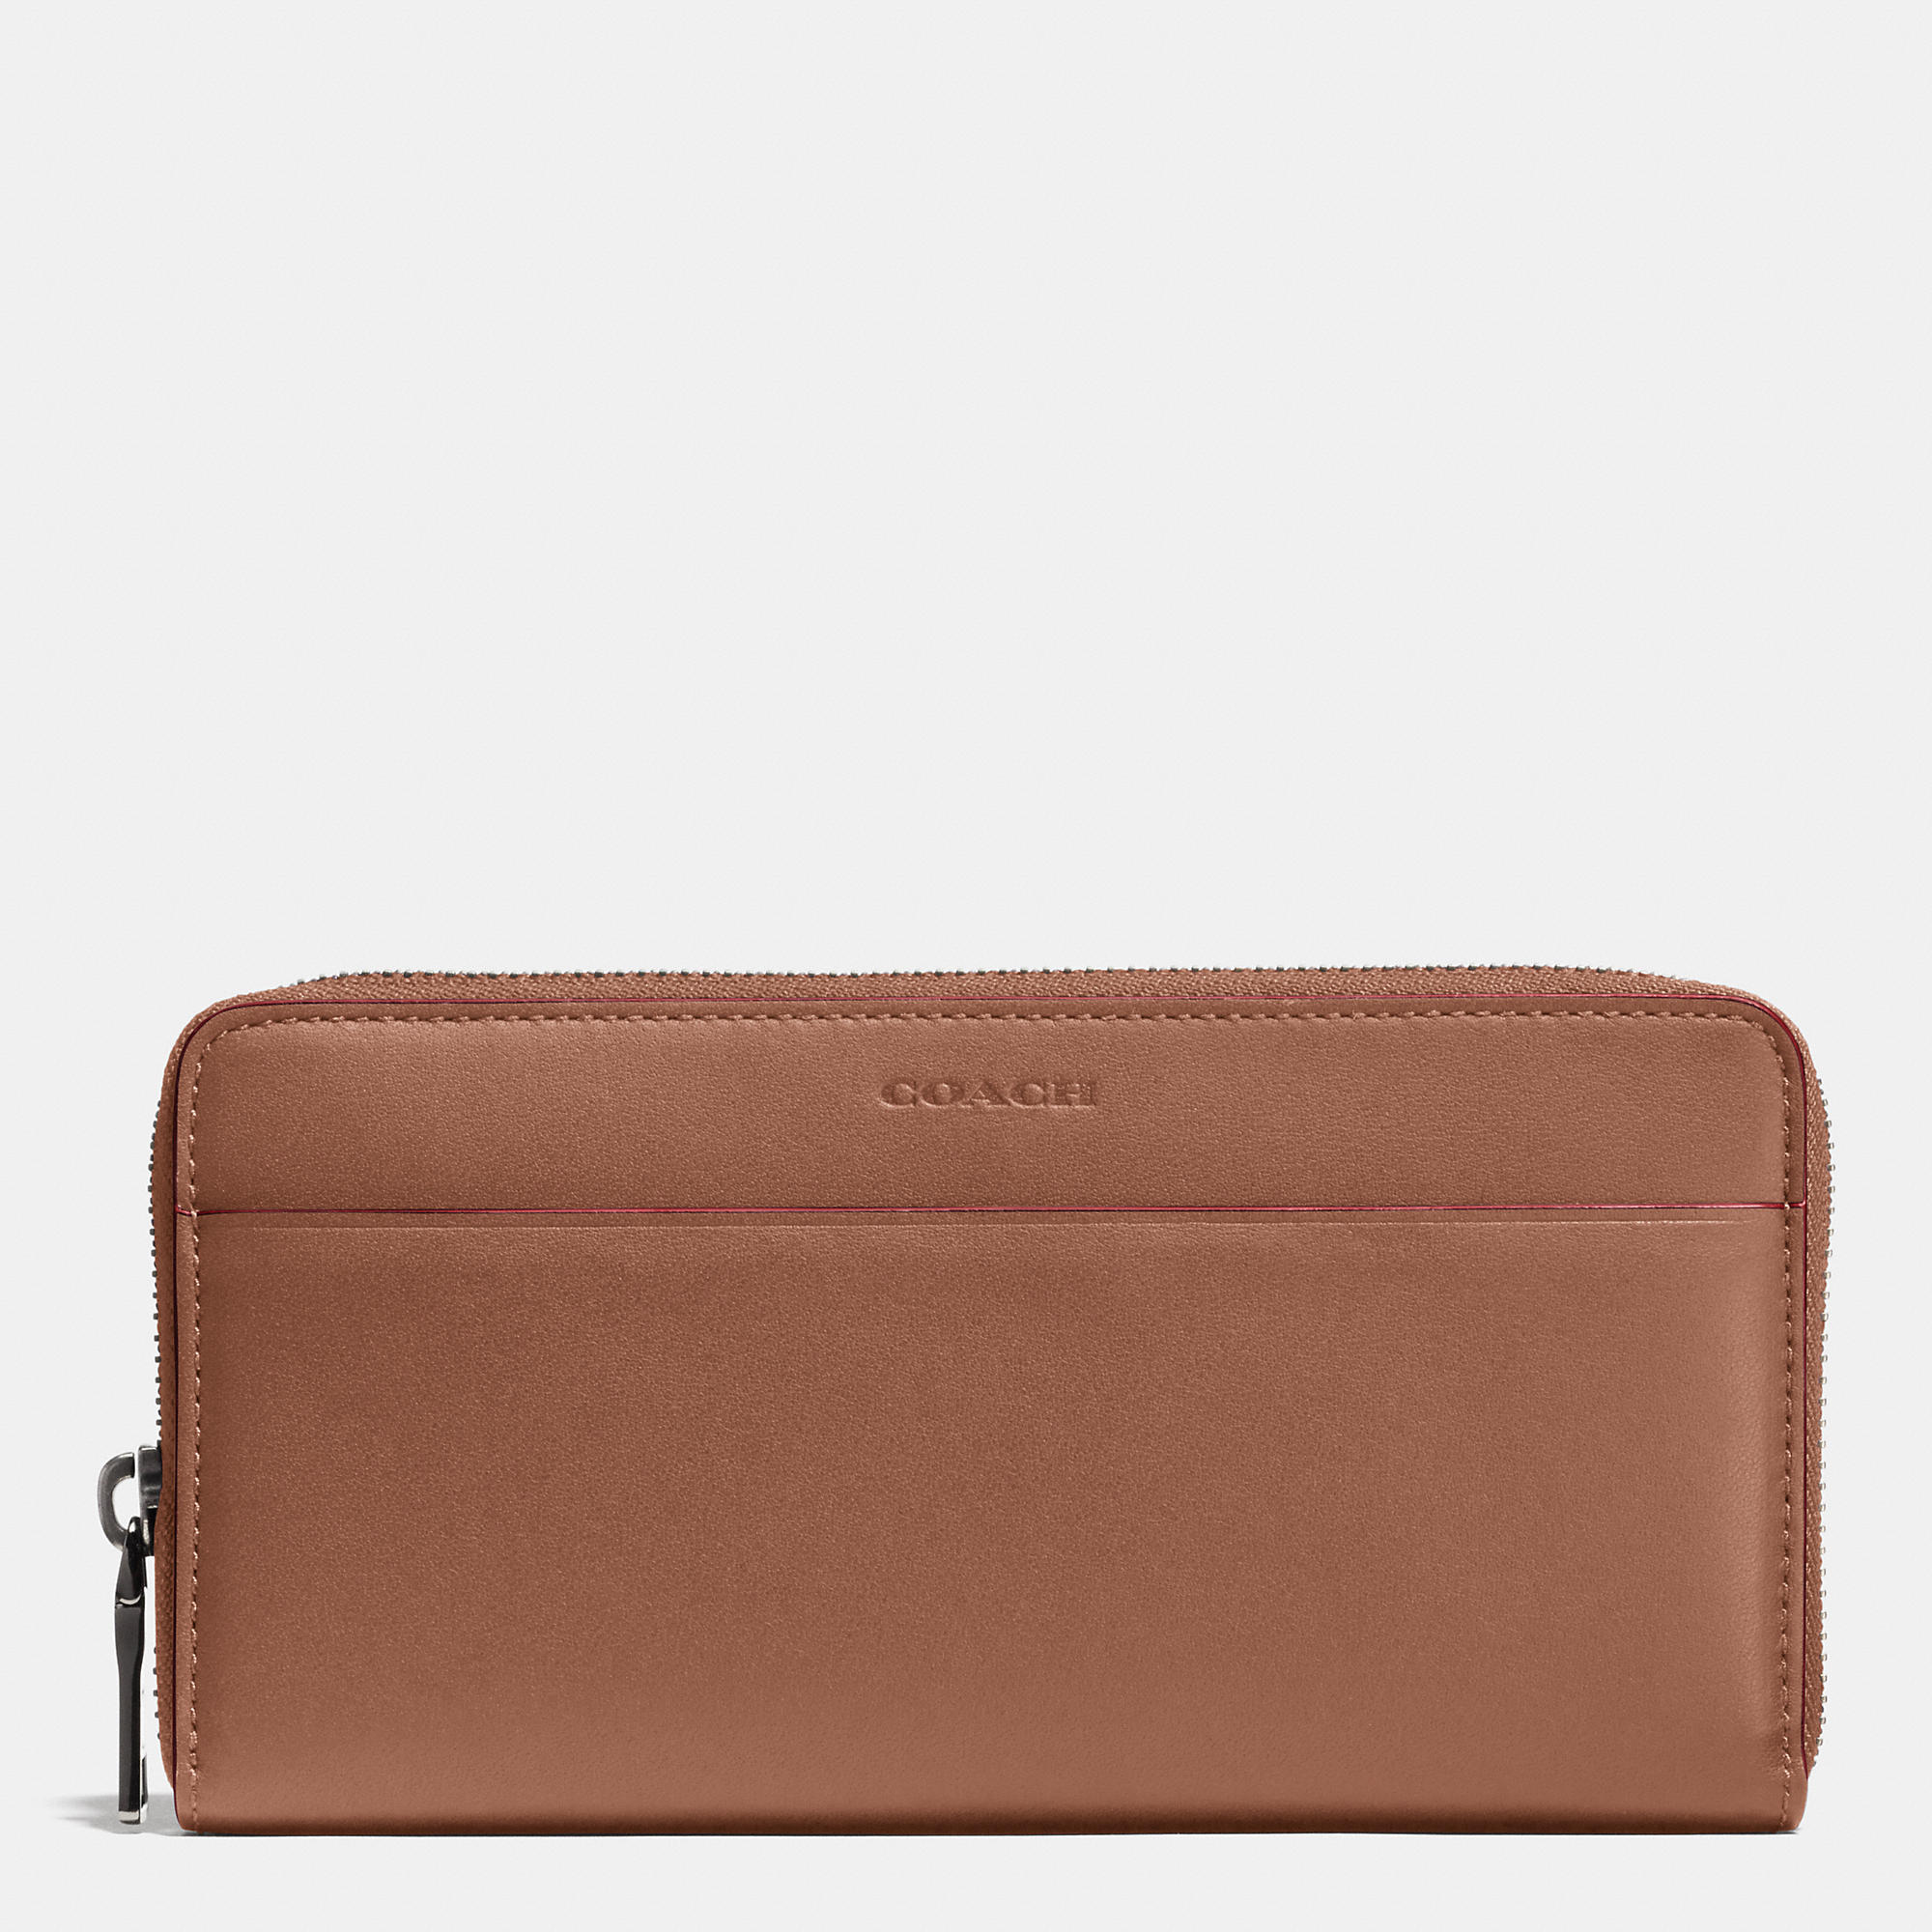 Causual Coach Accordion Zip Wallet In Glovetanned Leather | Coach Outlet Canada